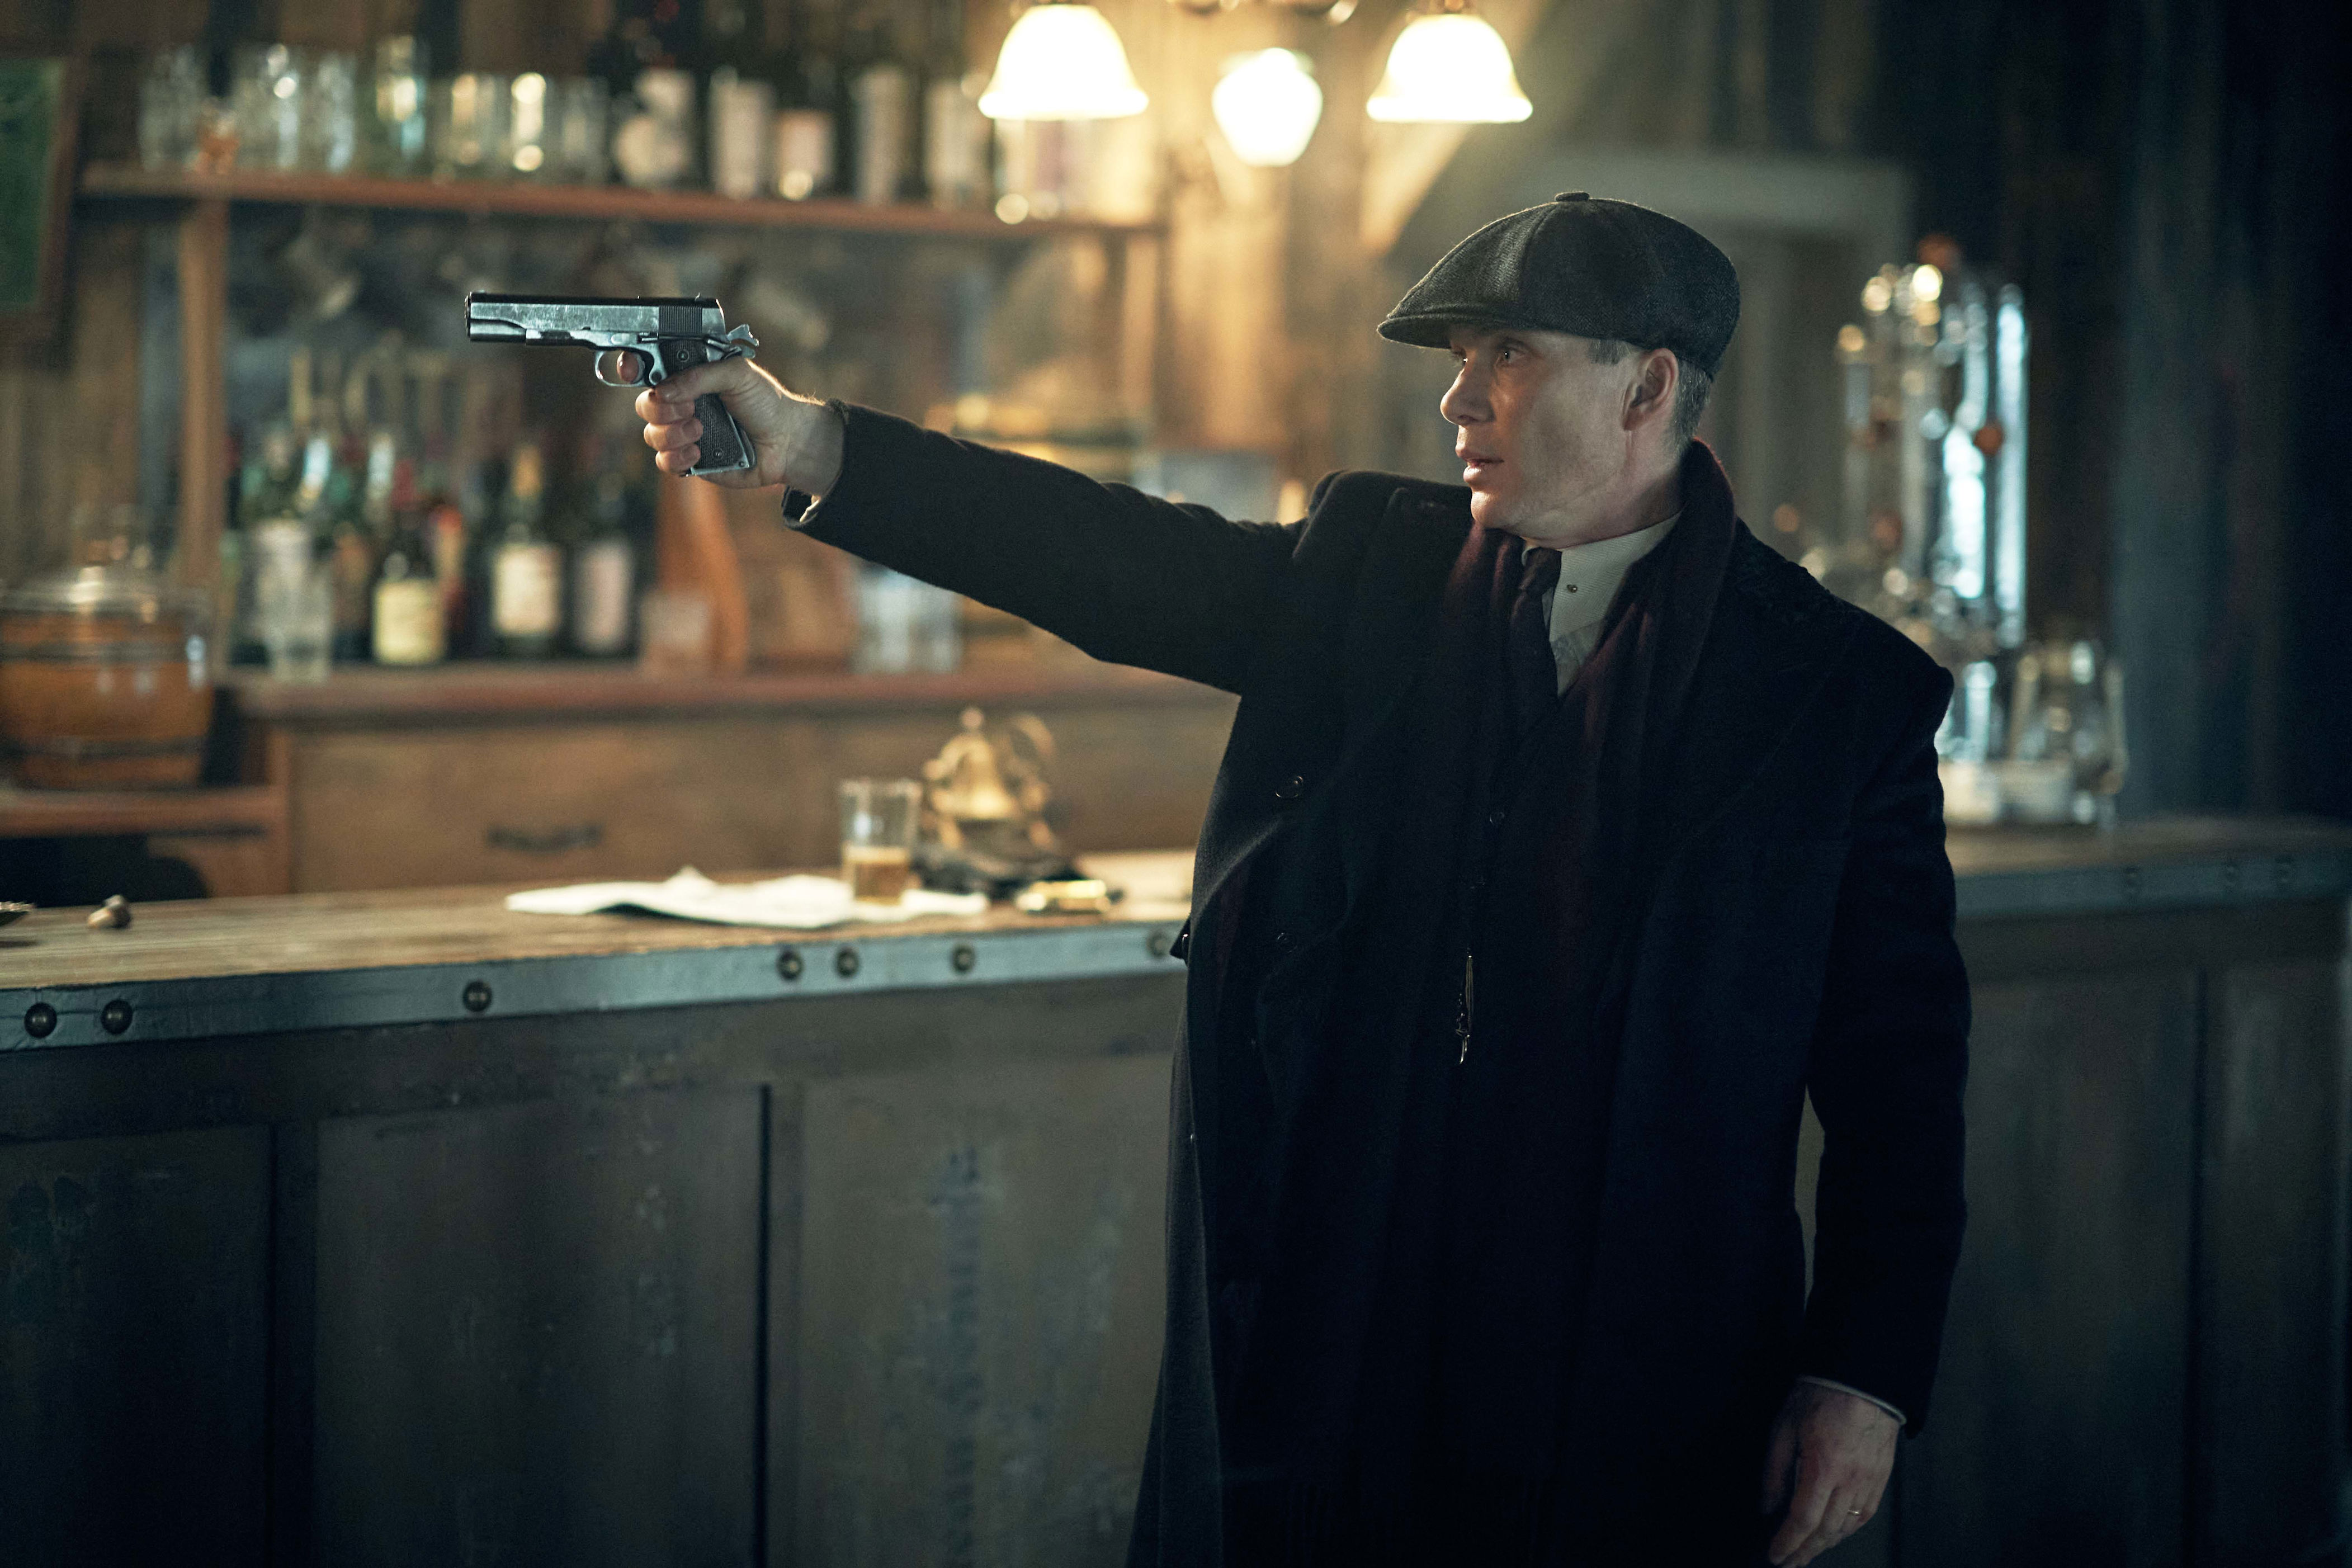 <p>The Shelbys are one of our favorite crime families from across the pond, and in 2022, they returned for the sixth and final season of "Peaky Blinders." Cillian Murphy stars as Tommy Shelby, the calculating WWI veteran-turned-gang boss and, later, cunning politician who calls the shots in Birmingham, England, in the early 20th century. The brilliant and tortured soul is as determined to expand his family's criminal enterprises as he is to expand his political power. A "Peaky Blinders" movie will follow the series -- creator Steven Knight revealed it will shoot in 2023.</p><p>MORE: <a href="https://www.wonderwall.com/entertainment/movies/best-movies-about-mafia-mob-gangsters-3014687.gallery">Best movies about the mafia</a></p>